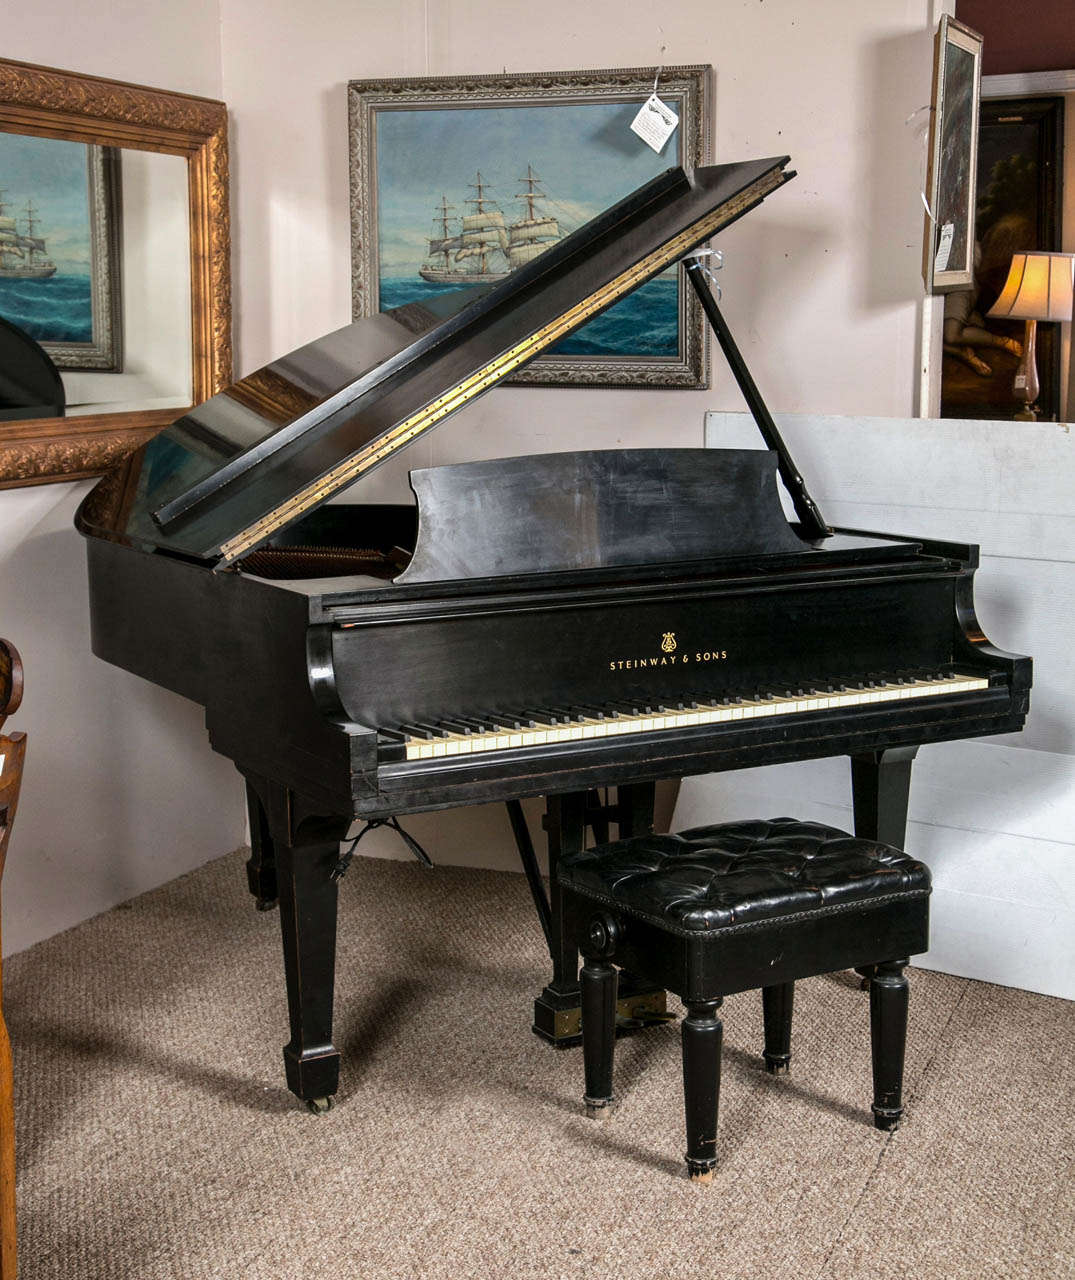 Steinway & Son Piano Model M Piano. Ebony finish circa 1967. This piano bearing the serial number #400854 appears to be in good condition. The soundboard doesn't appear to have any defects. Piano bench sold separately.